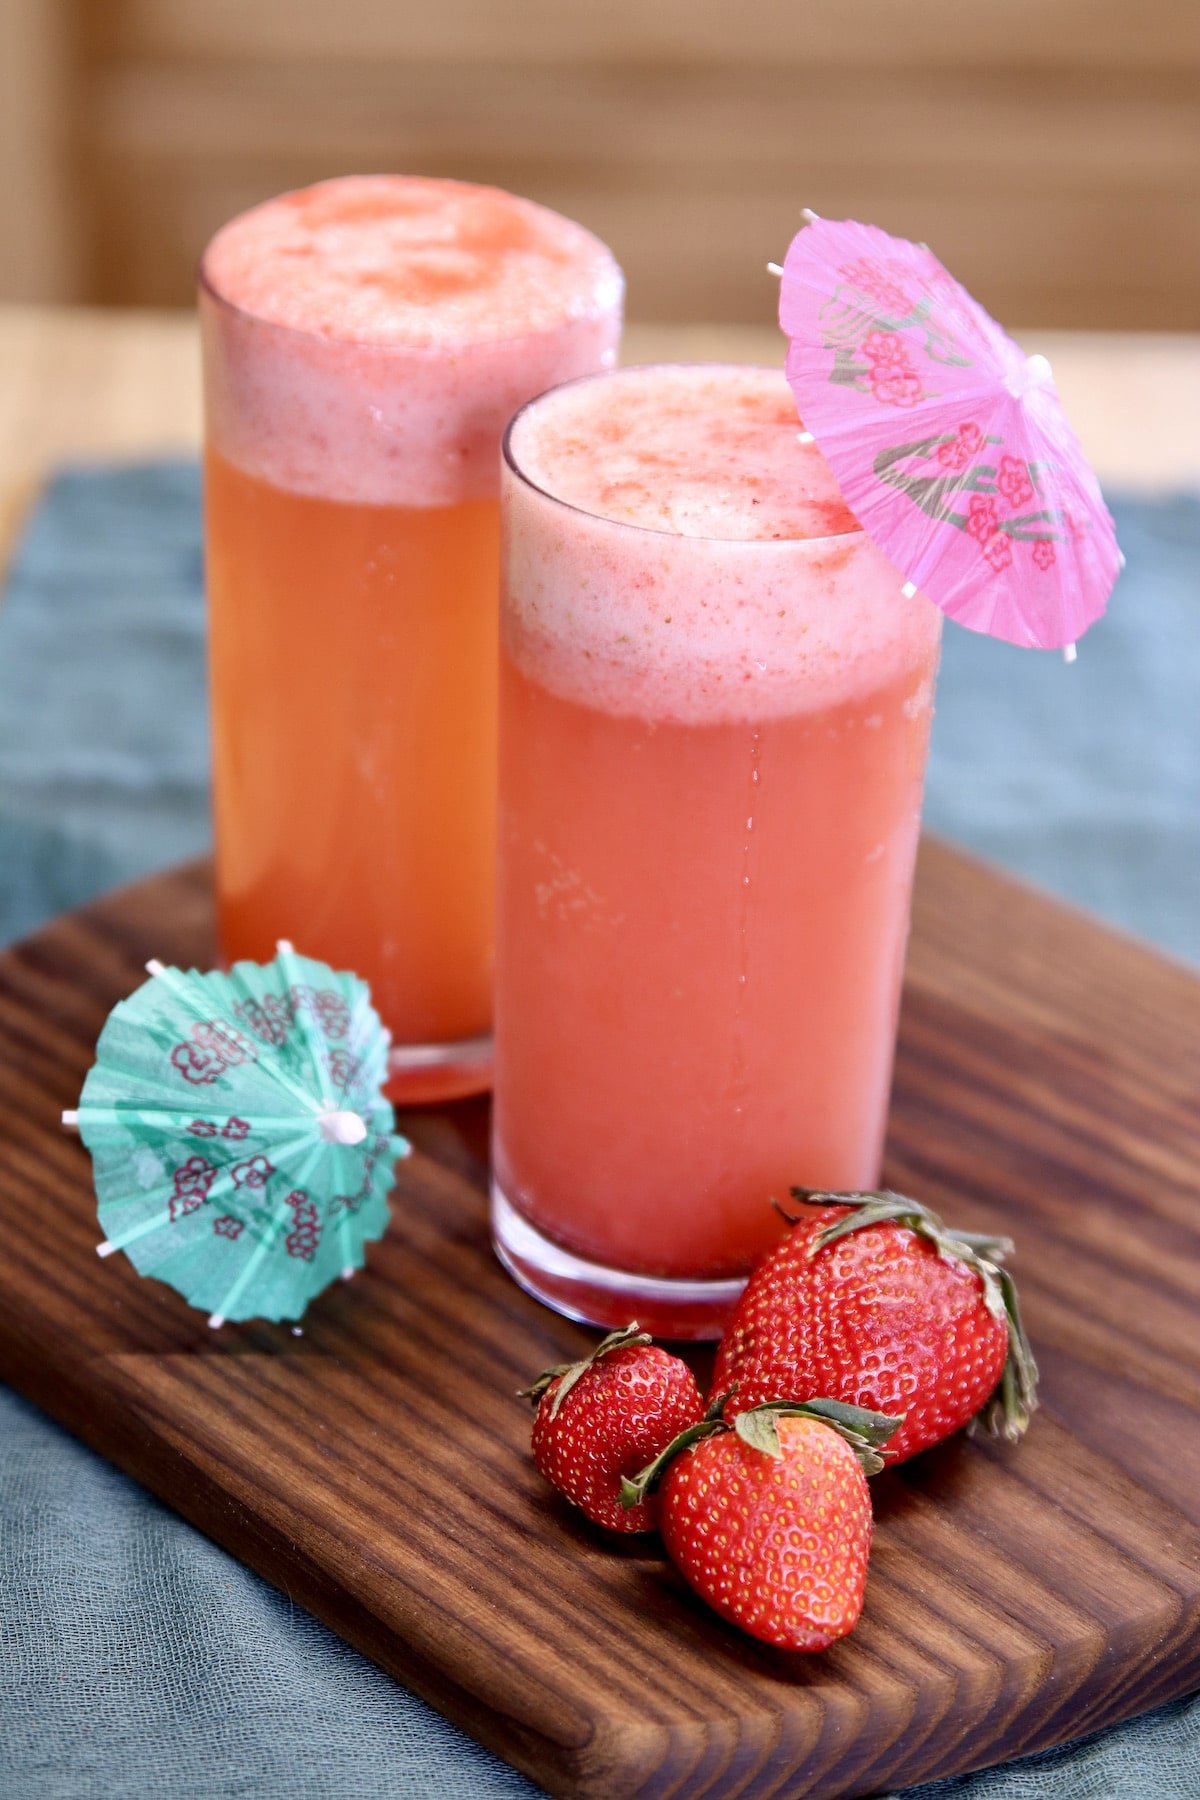 2 glasses of strawberry shandy cocktails with fresh strawberries and drink umbrellas.